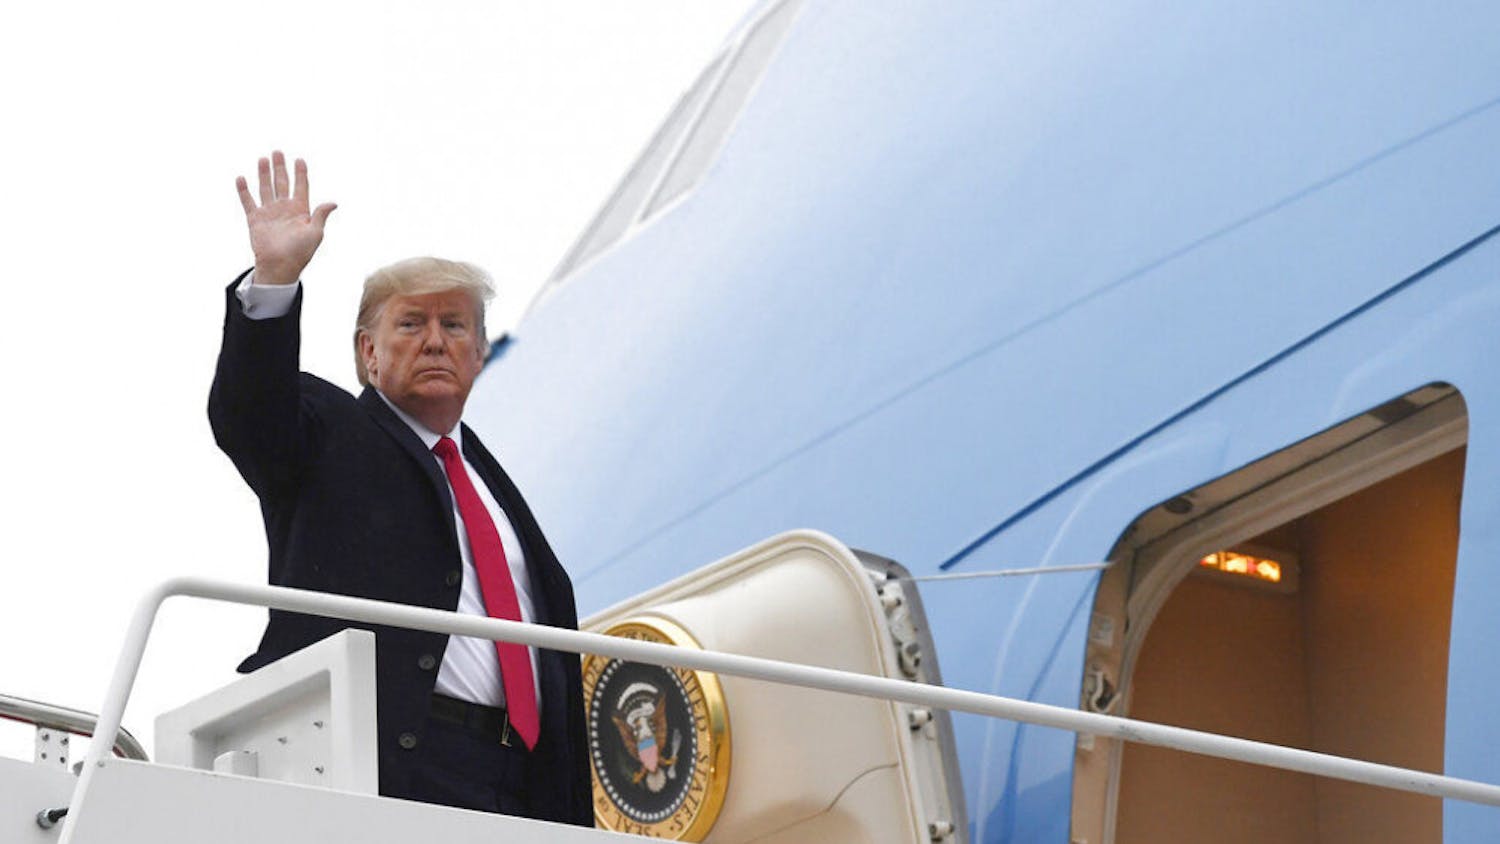 President Donald Trump waves from the top of the steps of Air Force One at Andrews Air Force Base in Md., Friday, Jan. 31, 2020. (AP Photo/Susan Walsh)